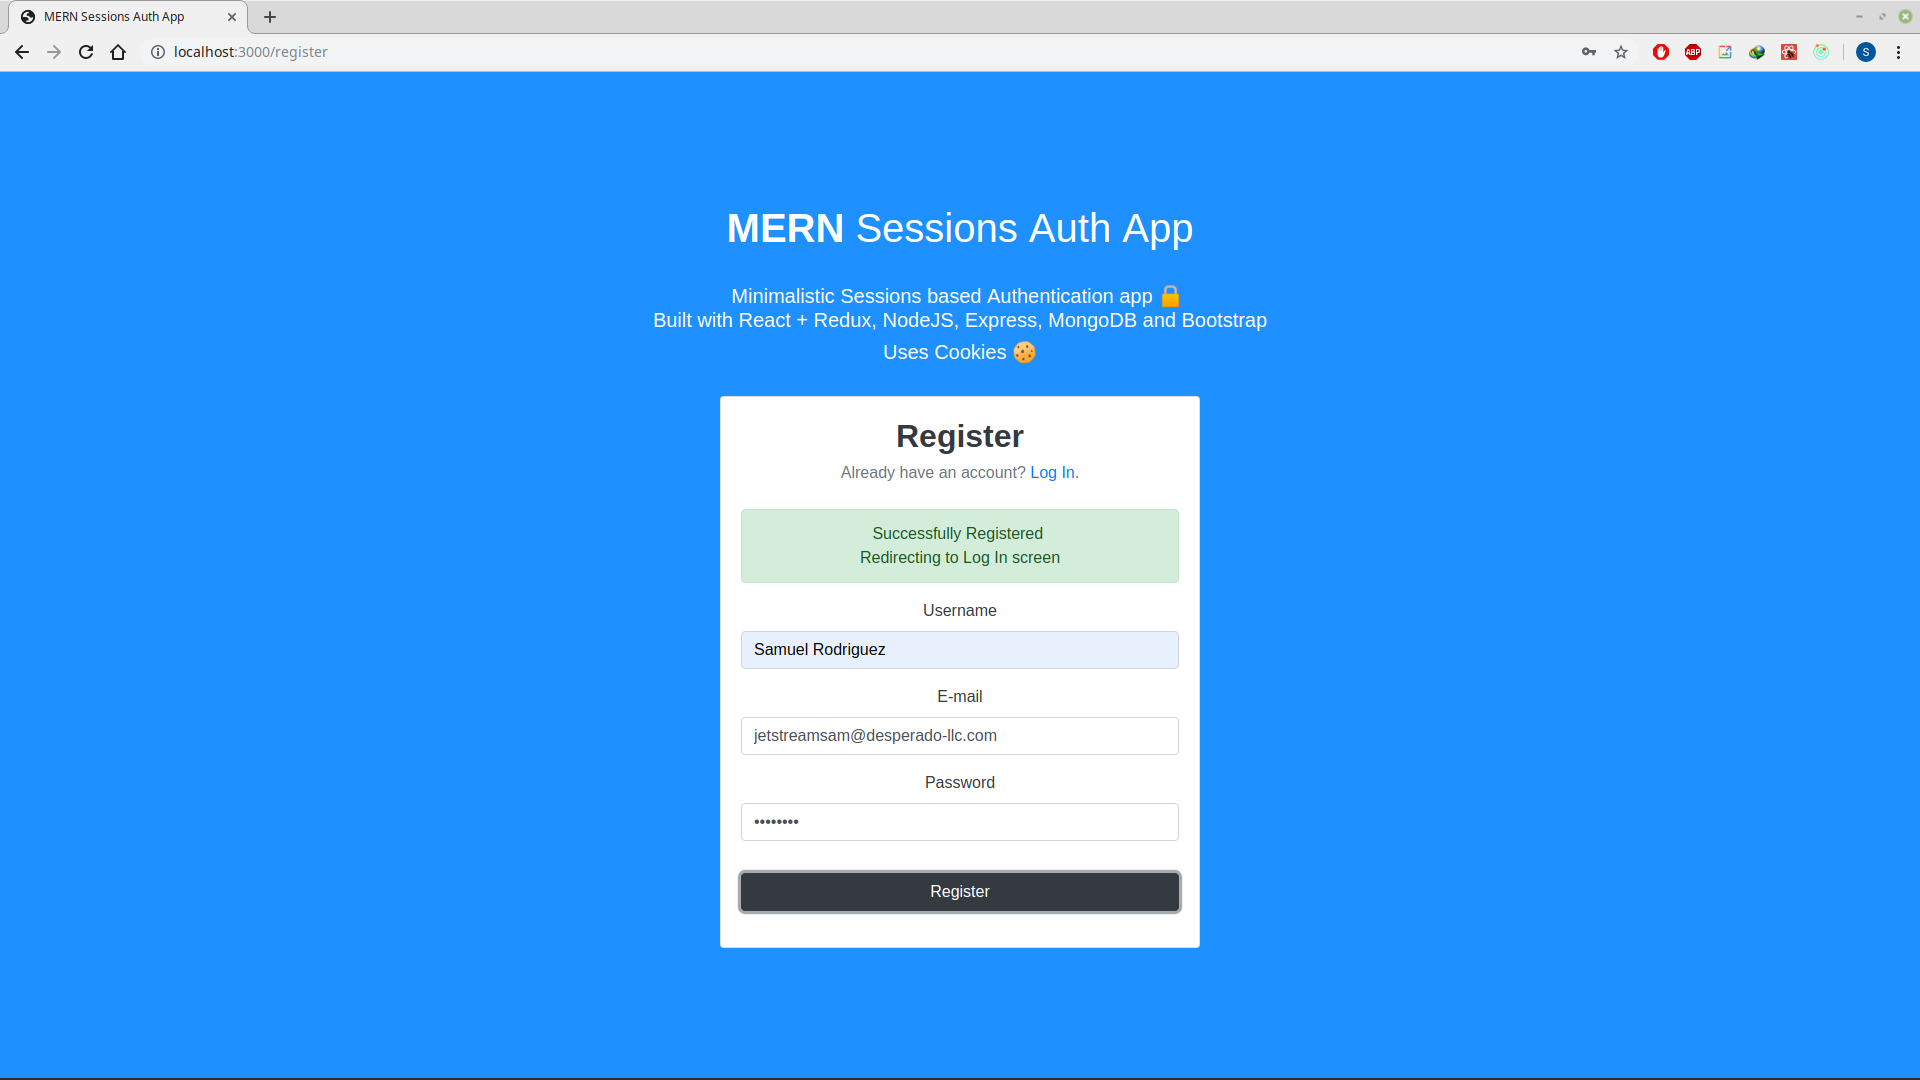  After successful Registration, message is displayed and redirected to Login screen